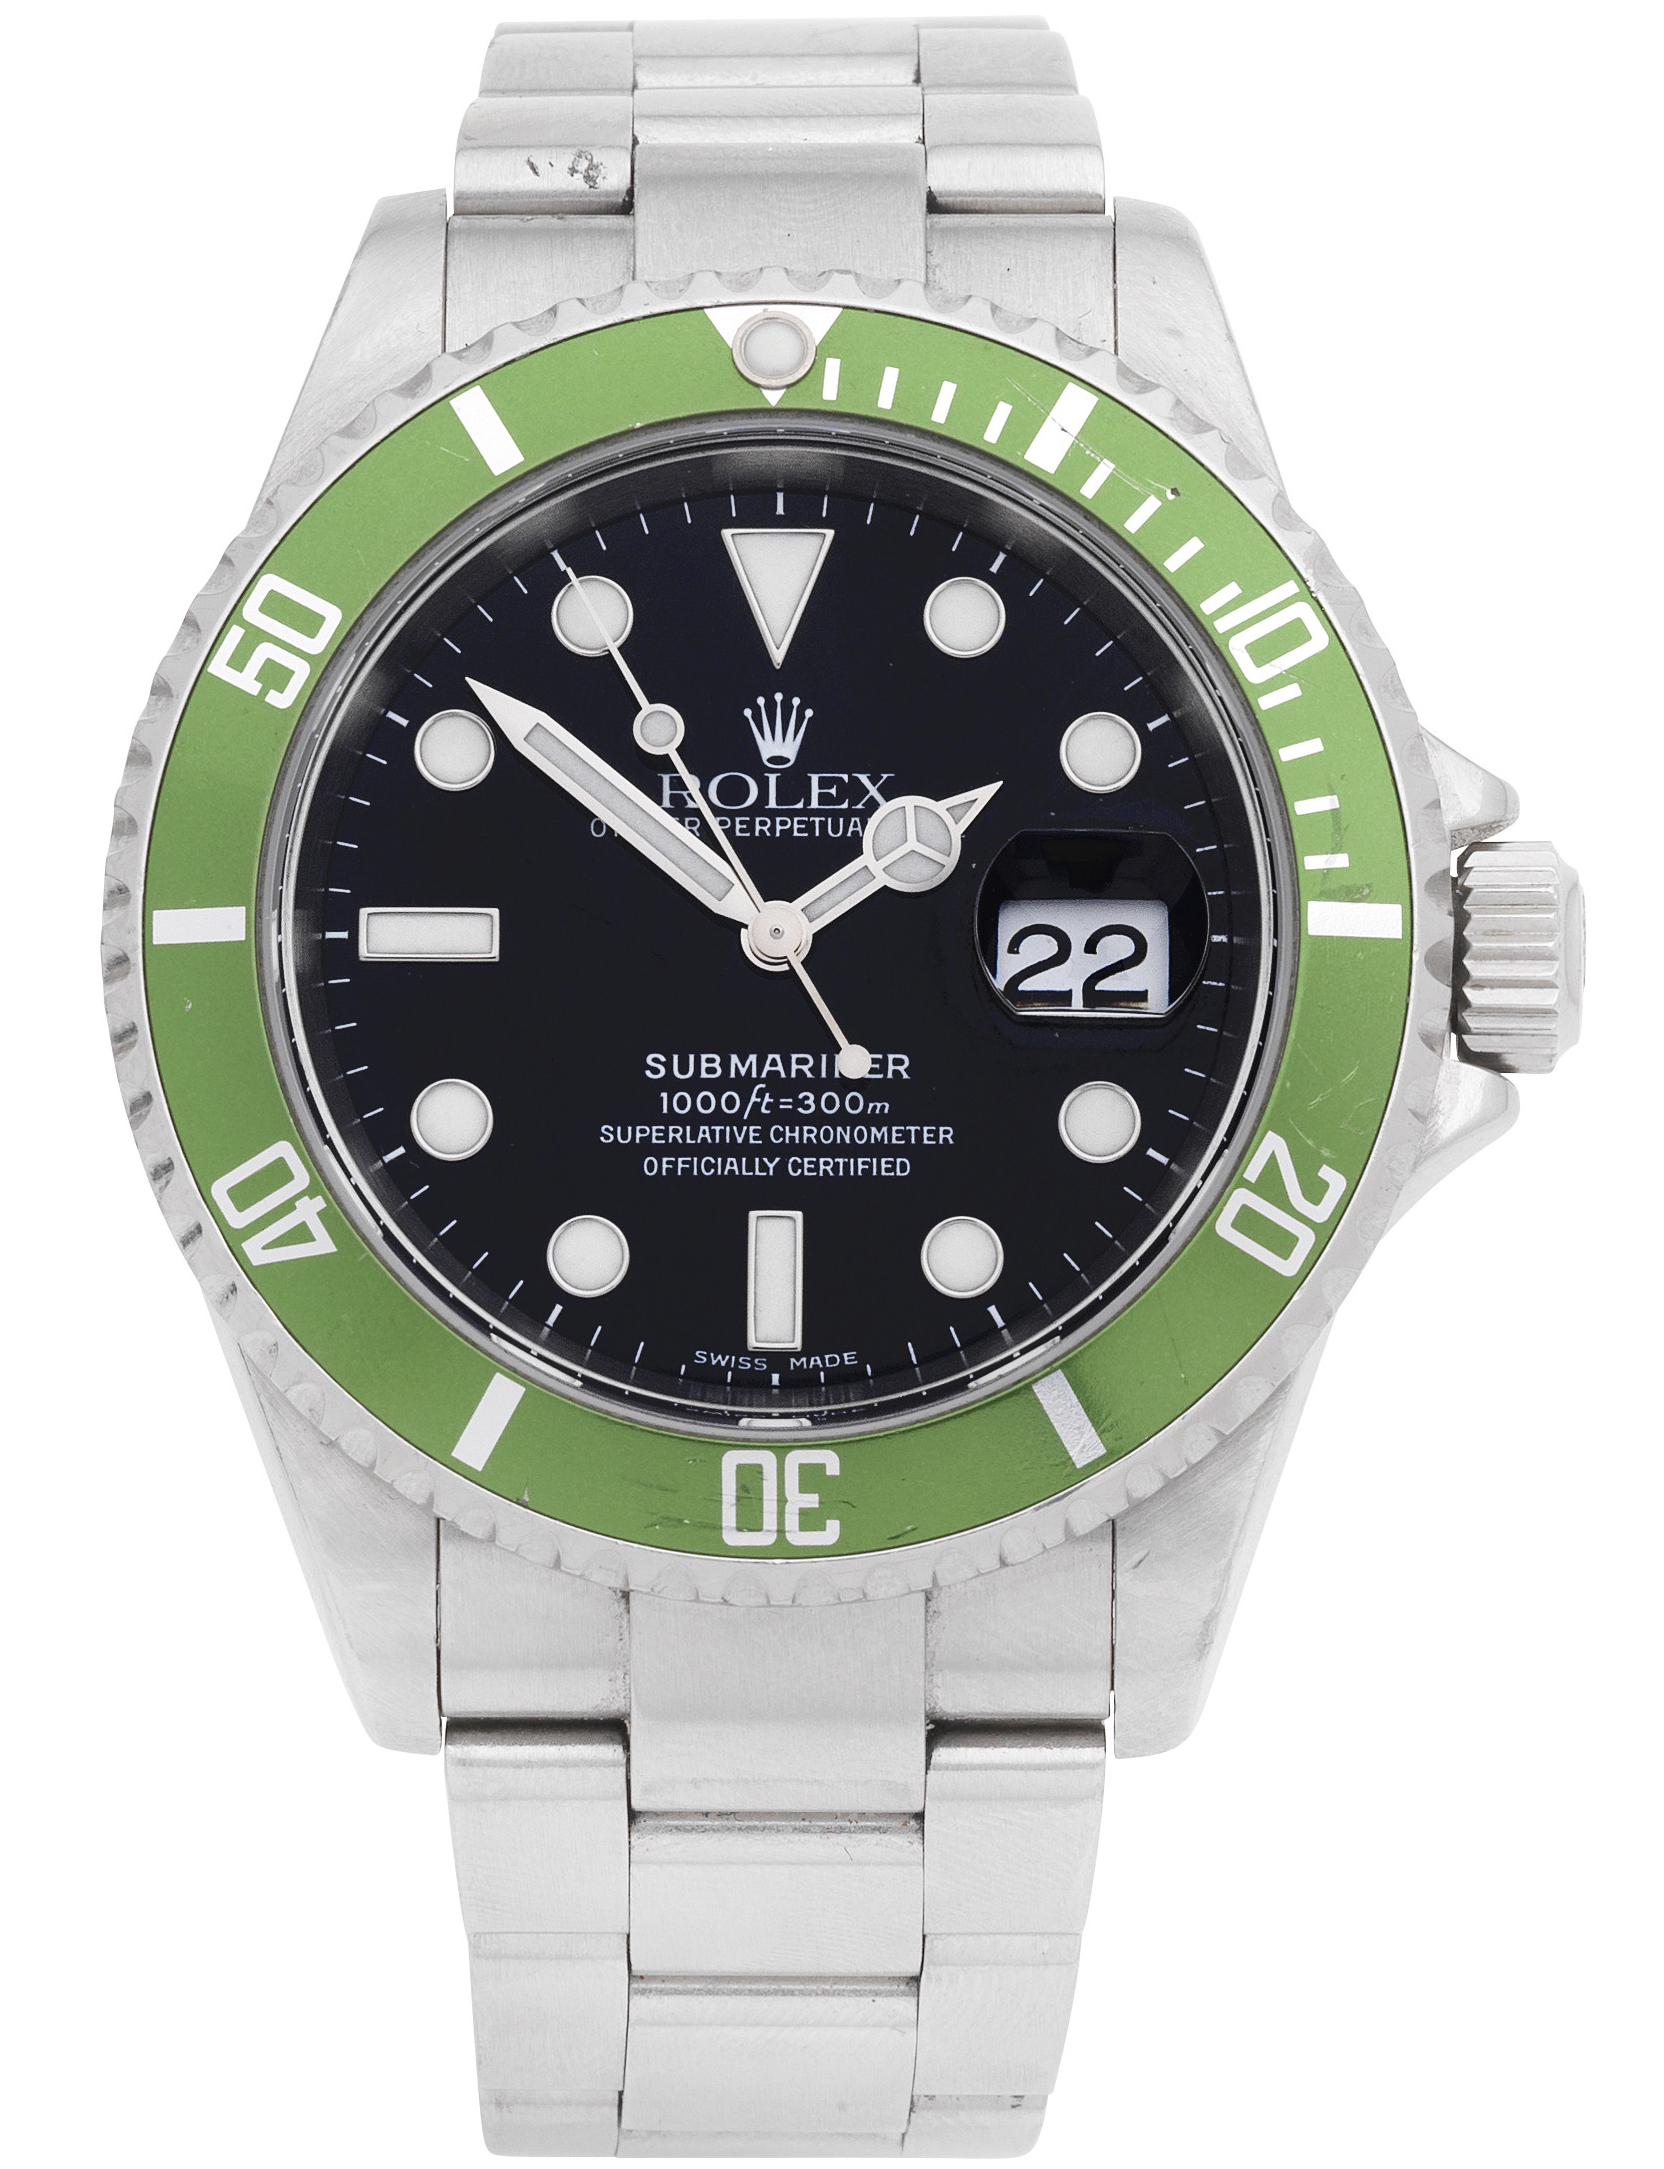 Bonhams rolex submariner %e2%80%98kermit stainless steel automatic calendar bracelet watch offered with an estimate of 8000 12000.